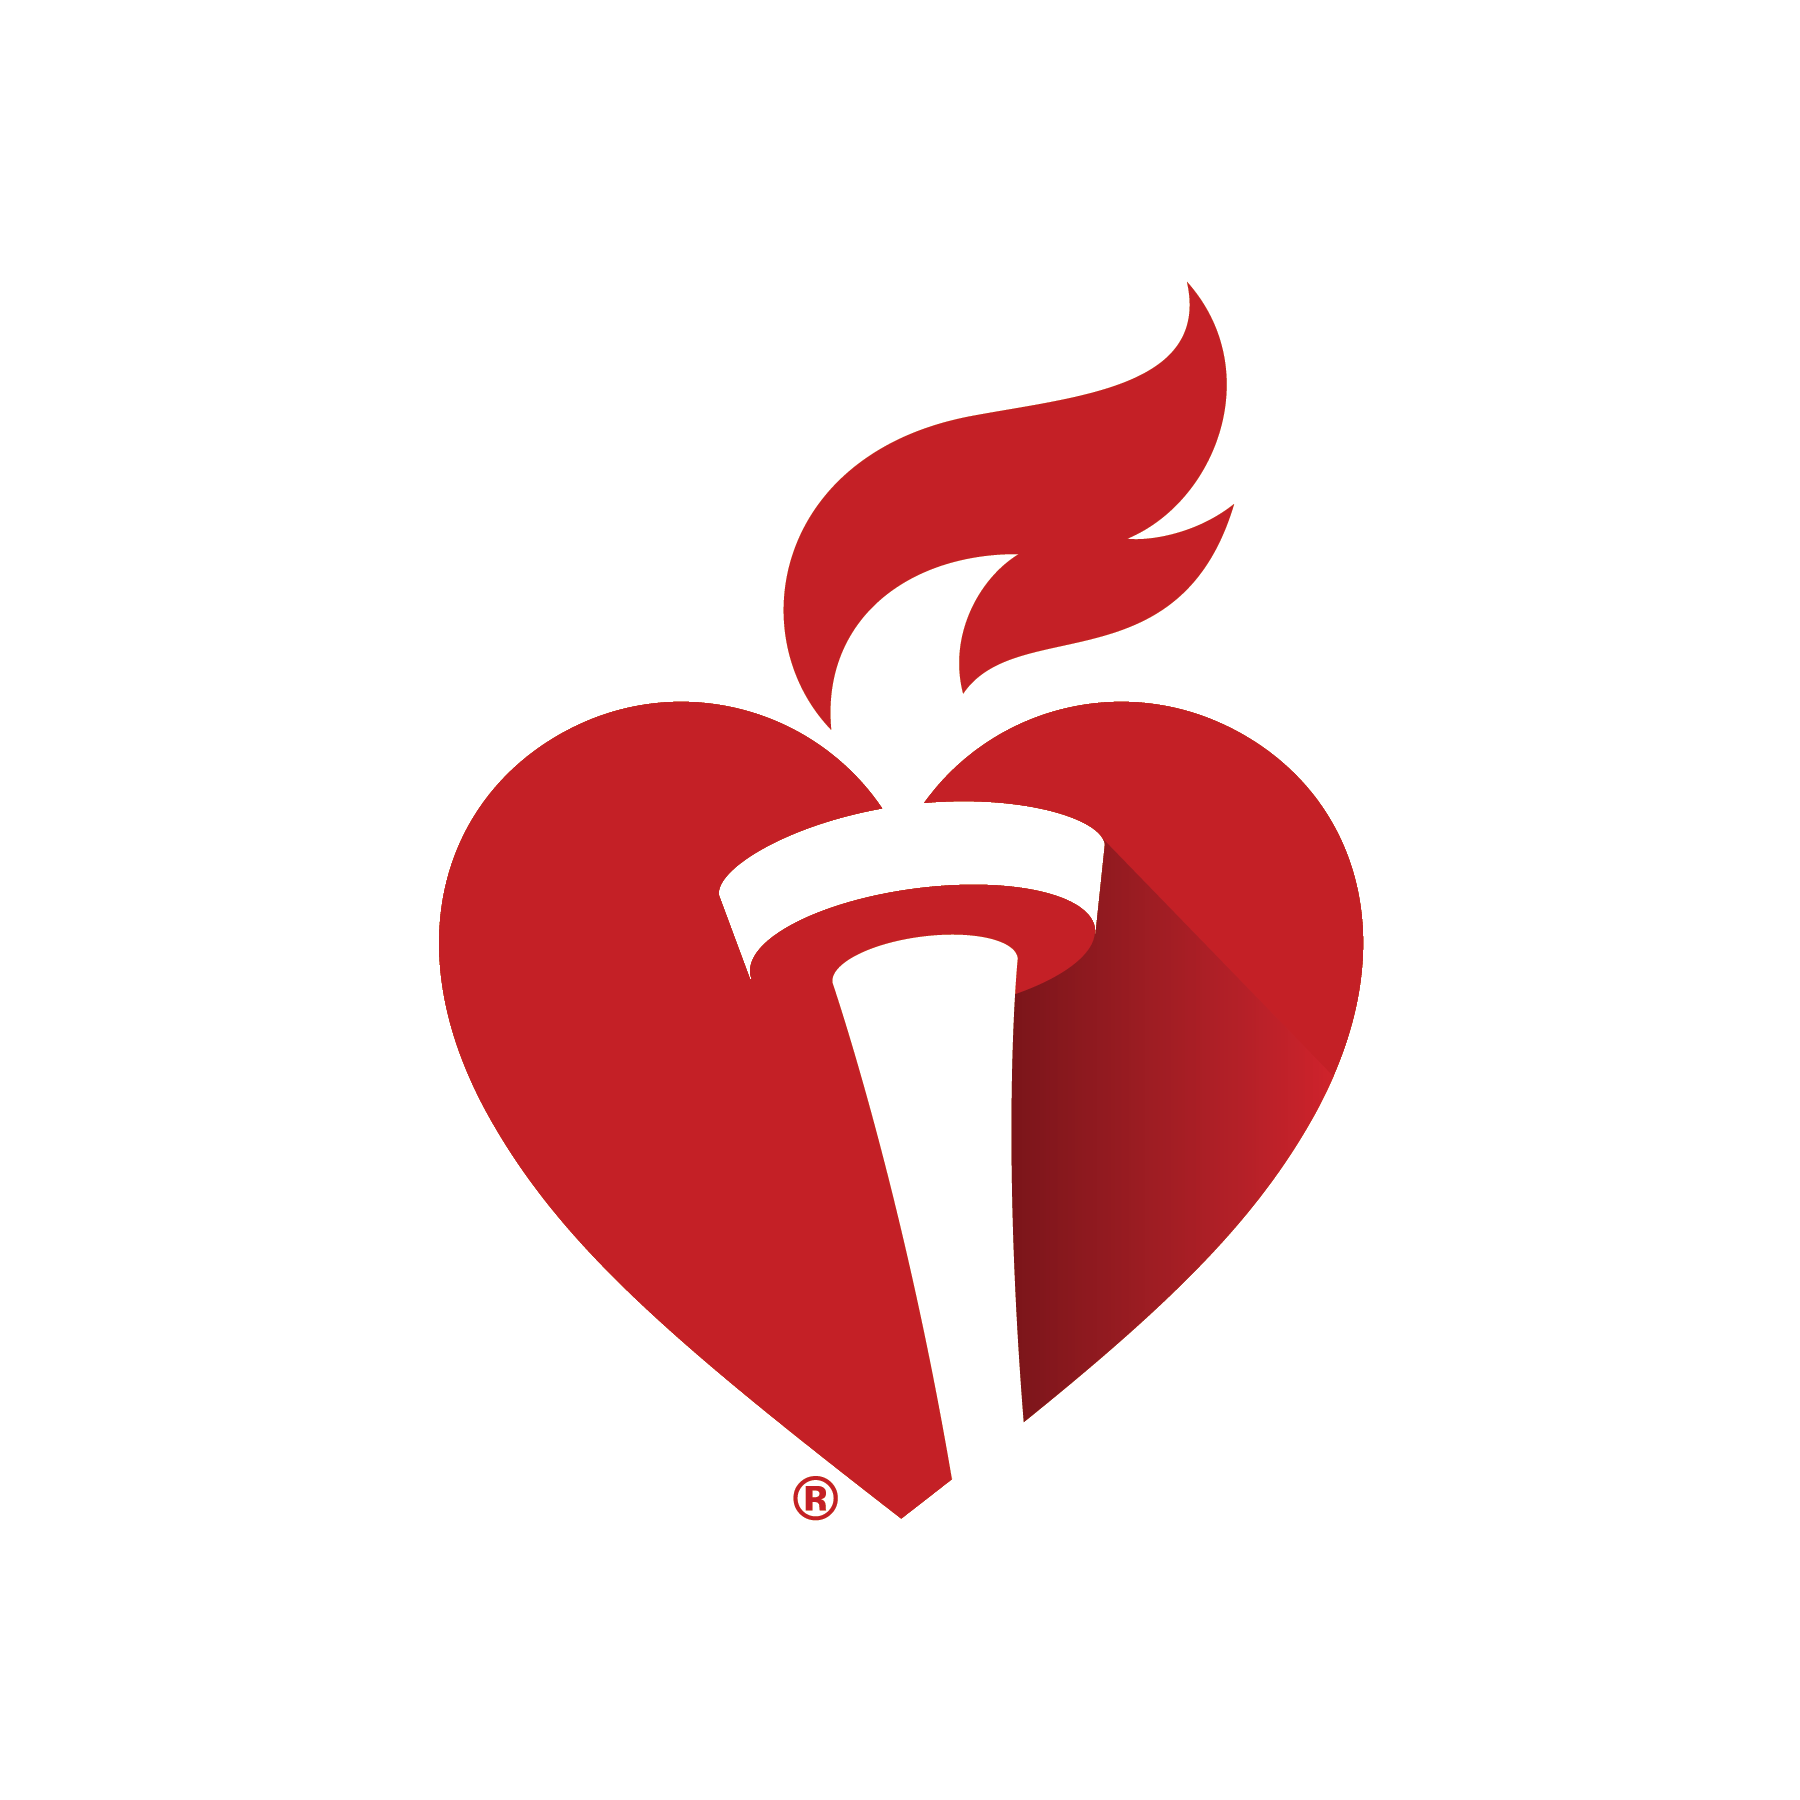 American Heart Association Central Texas partners with community stakeholders to launch Screen, Educate and Refer initiatives